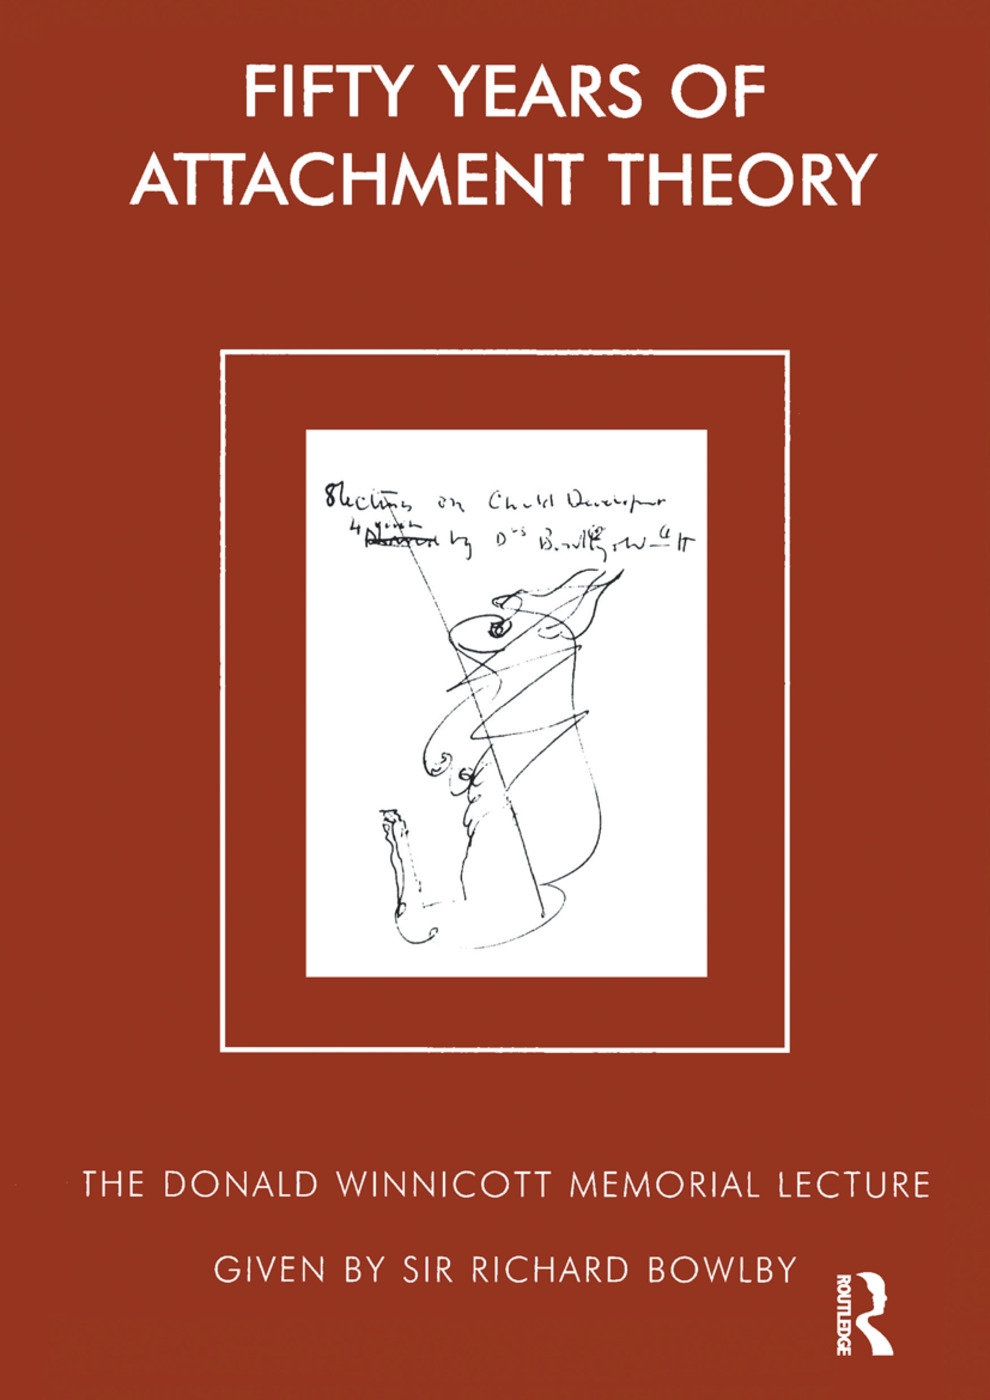 Fifty Years of Attachment Theory: Recollections of Donald Winnicott and John Bowlby